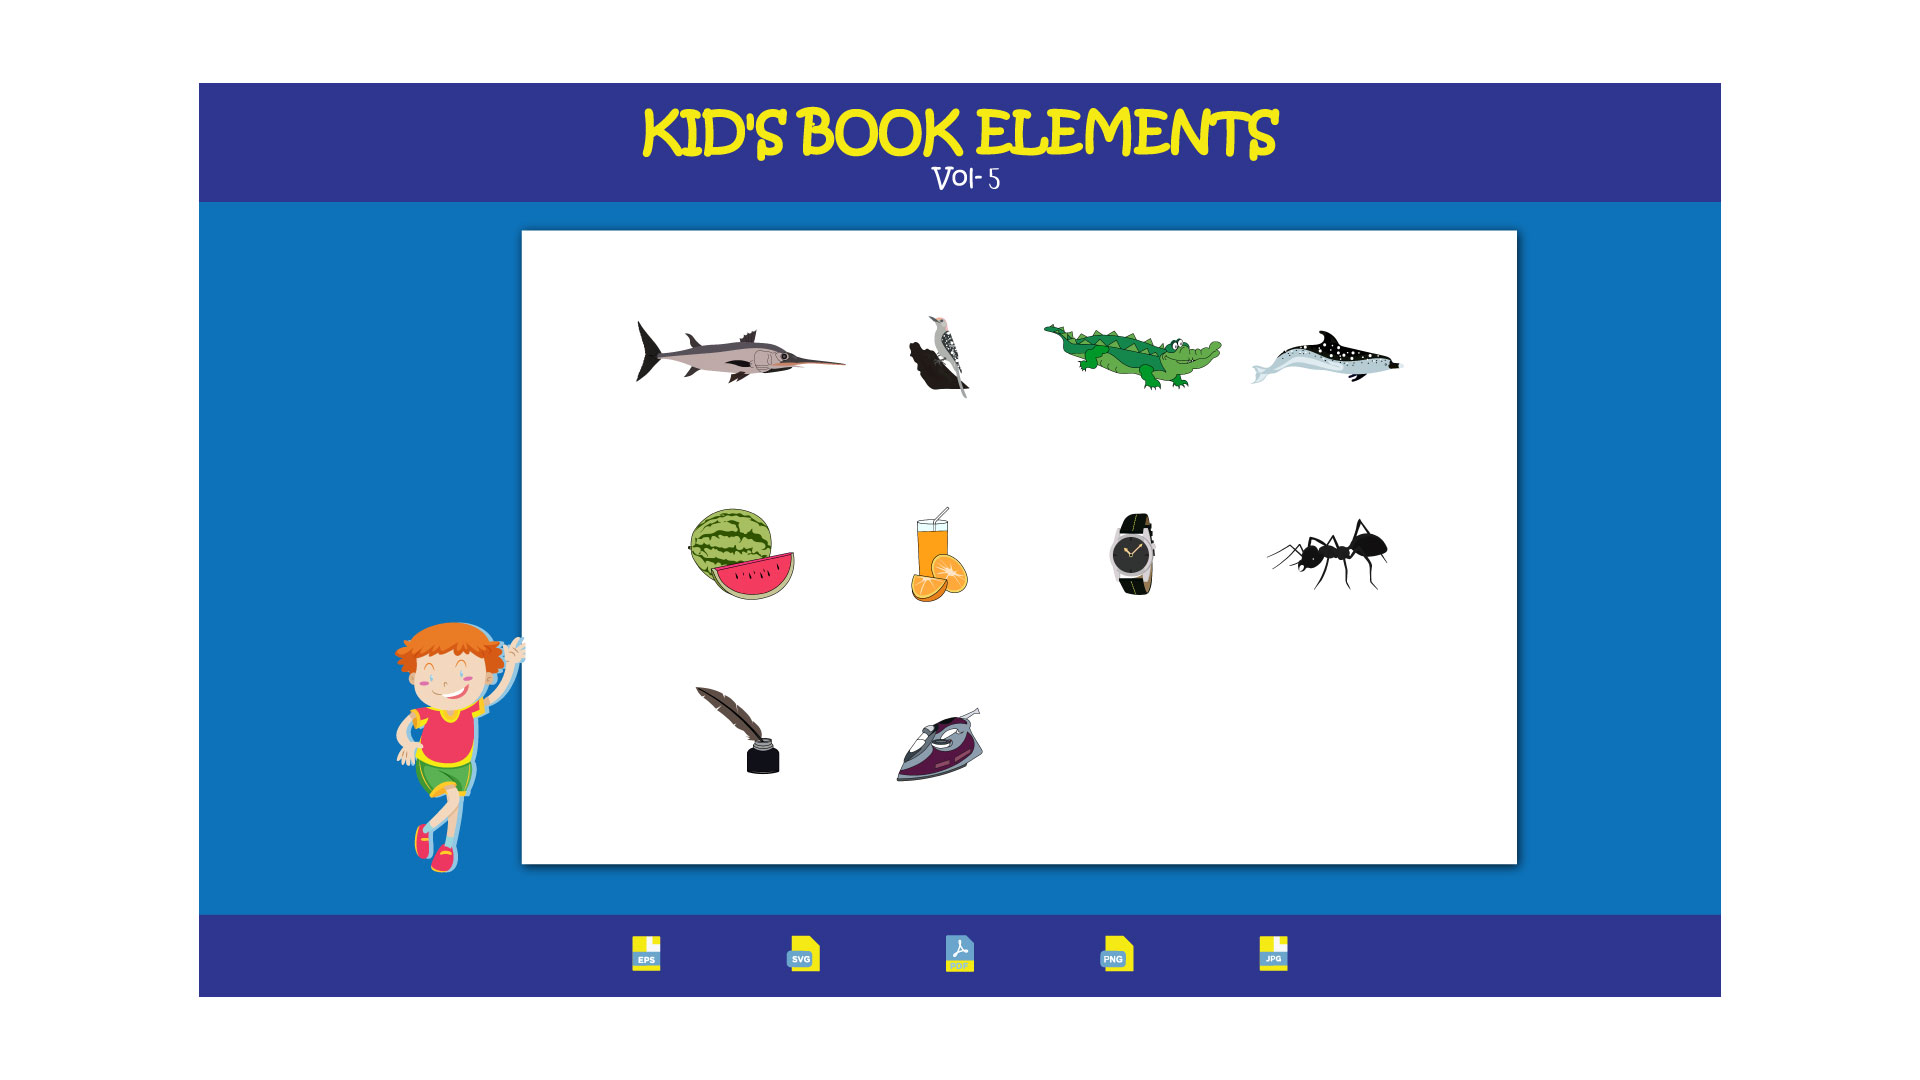 Kids book Elements Vol-5 cover image.